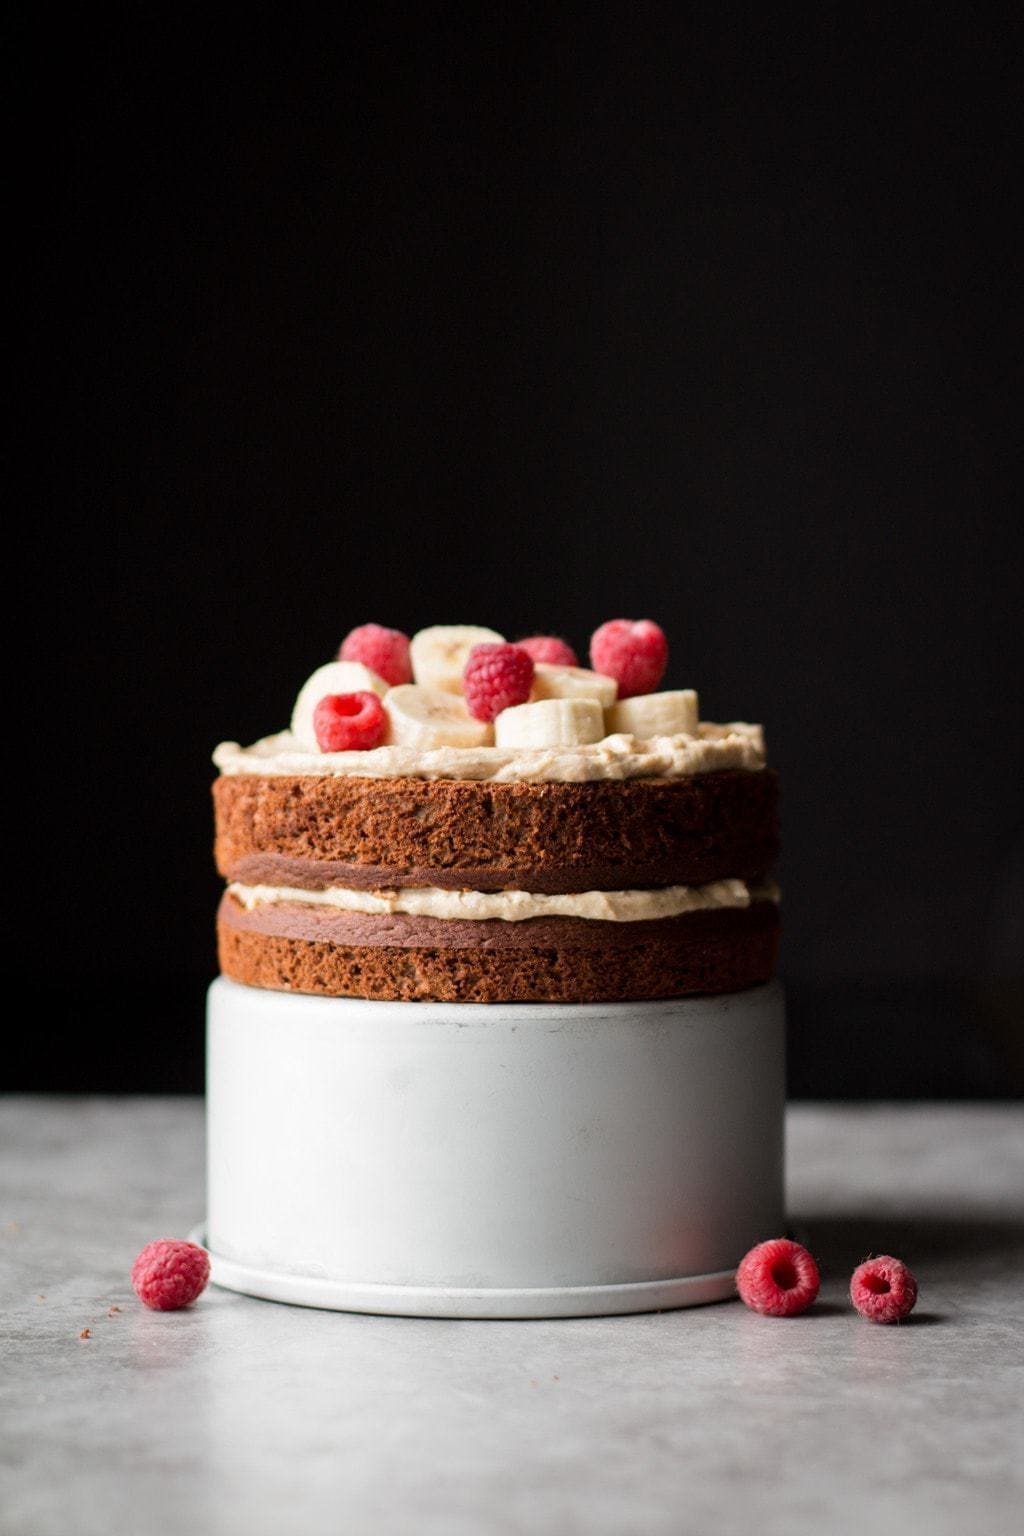 Spiced Banana Cake with Cream Cheese Frosting